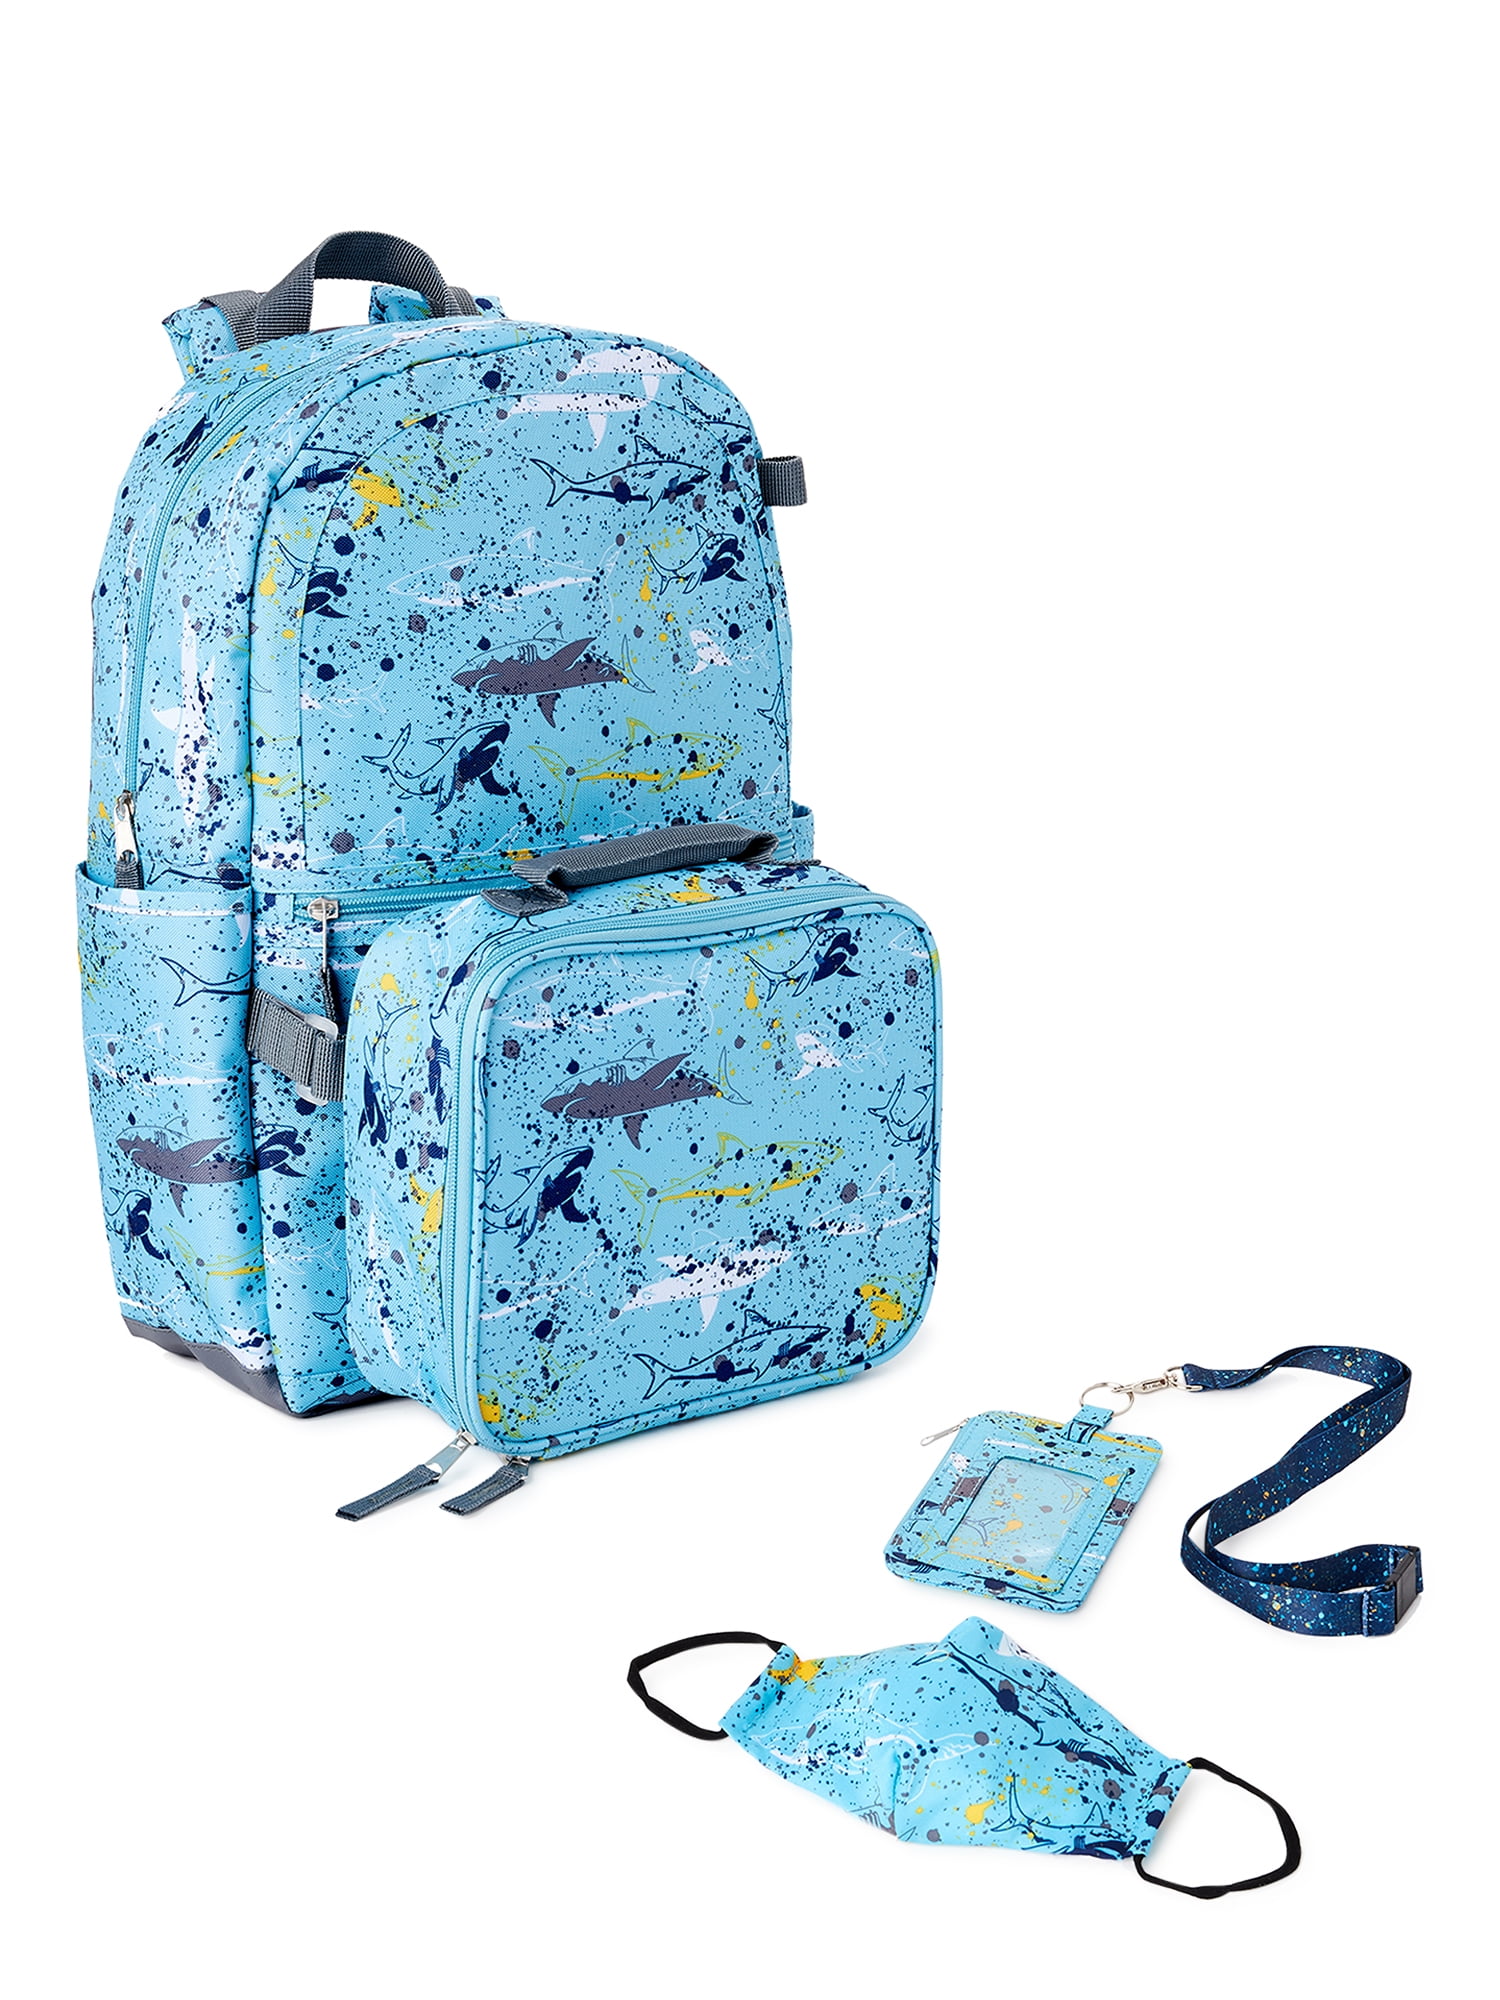  ZENWAWA Colorful Sharks Kids Backpack and Lunch Bag Set, Travel  Backpack with Insulated Lunch Box for Boys Girls, Cute Print Design for  School Office Hiking Picnic : Home & Kitchen